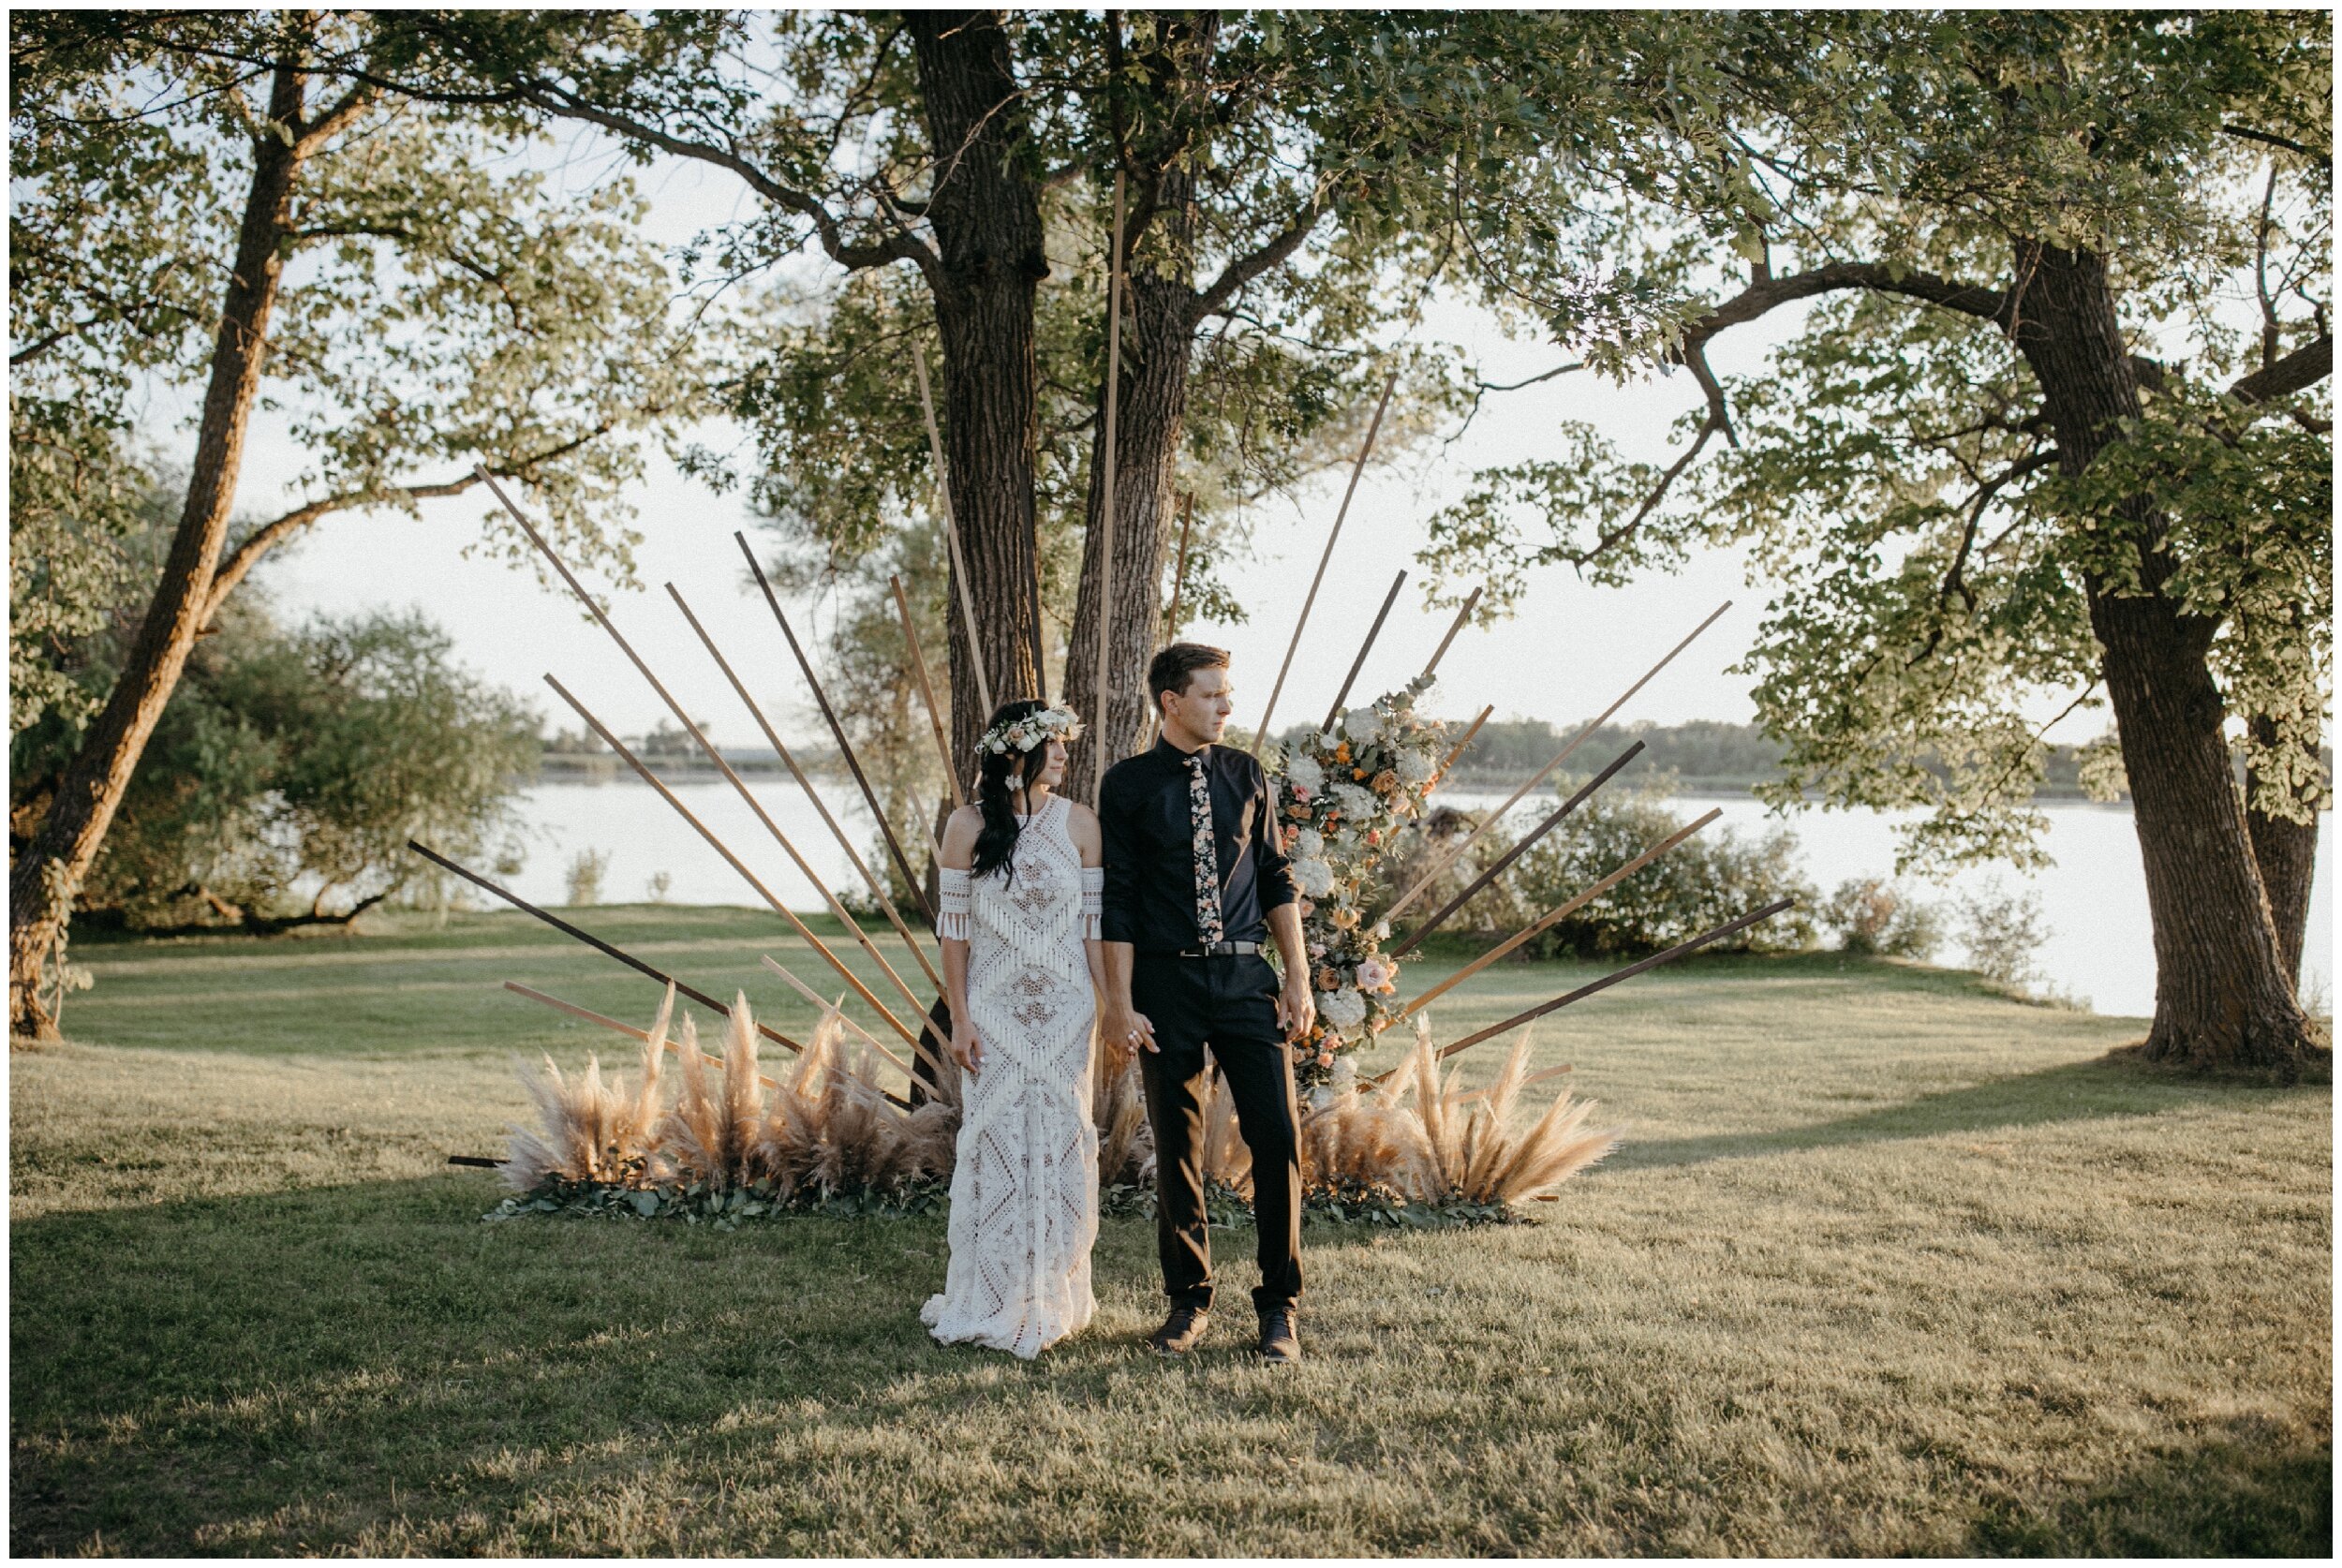 Bride and groom standing in front of boho themed wooden sunburst arch during sunset at their Minnesota summer backyard wedding